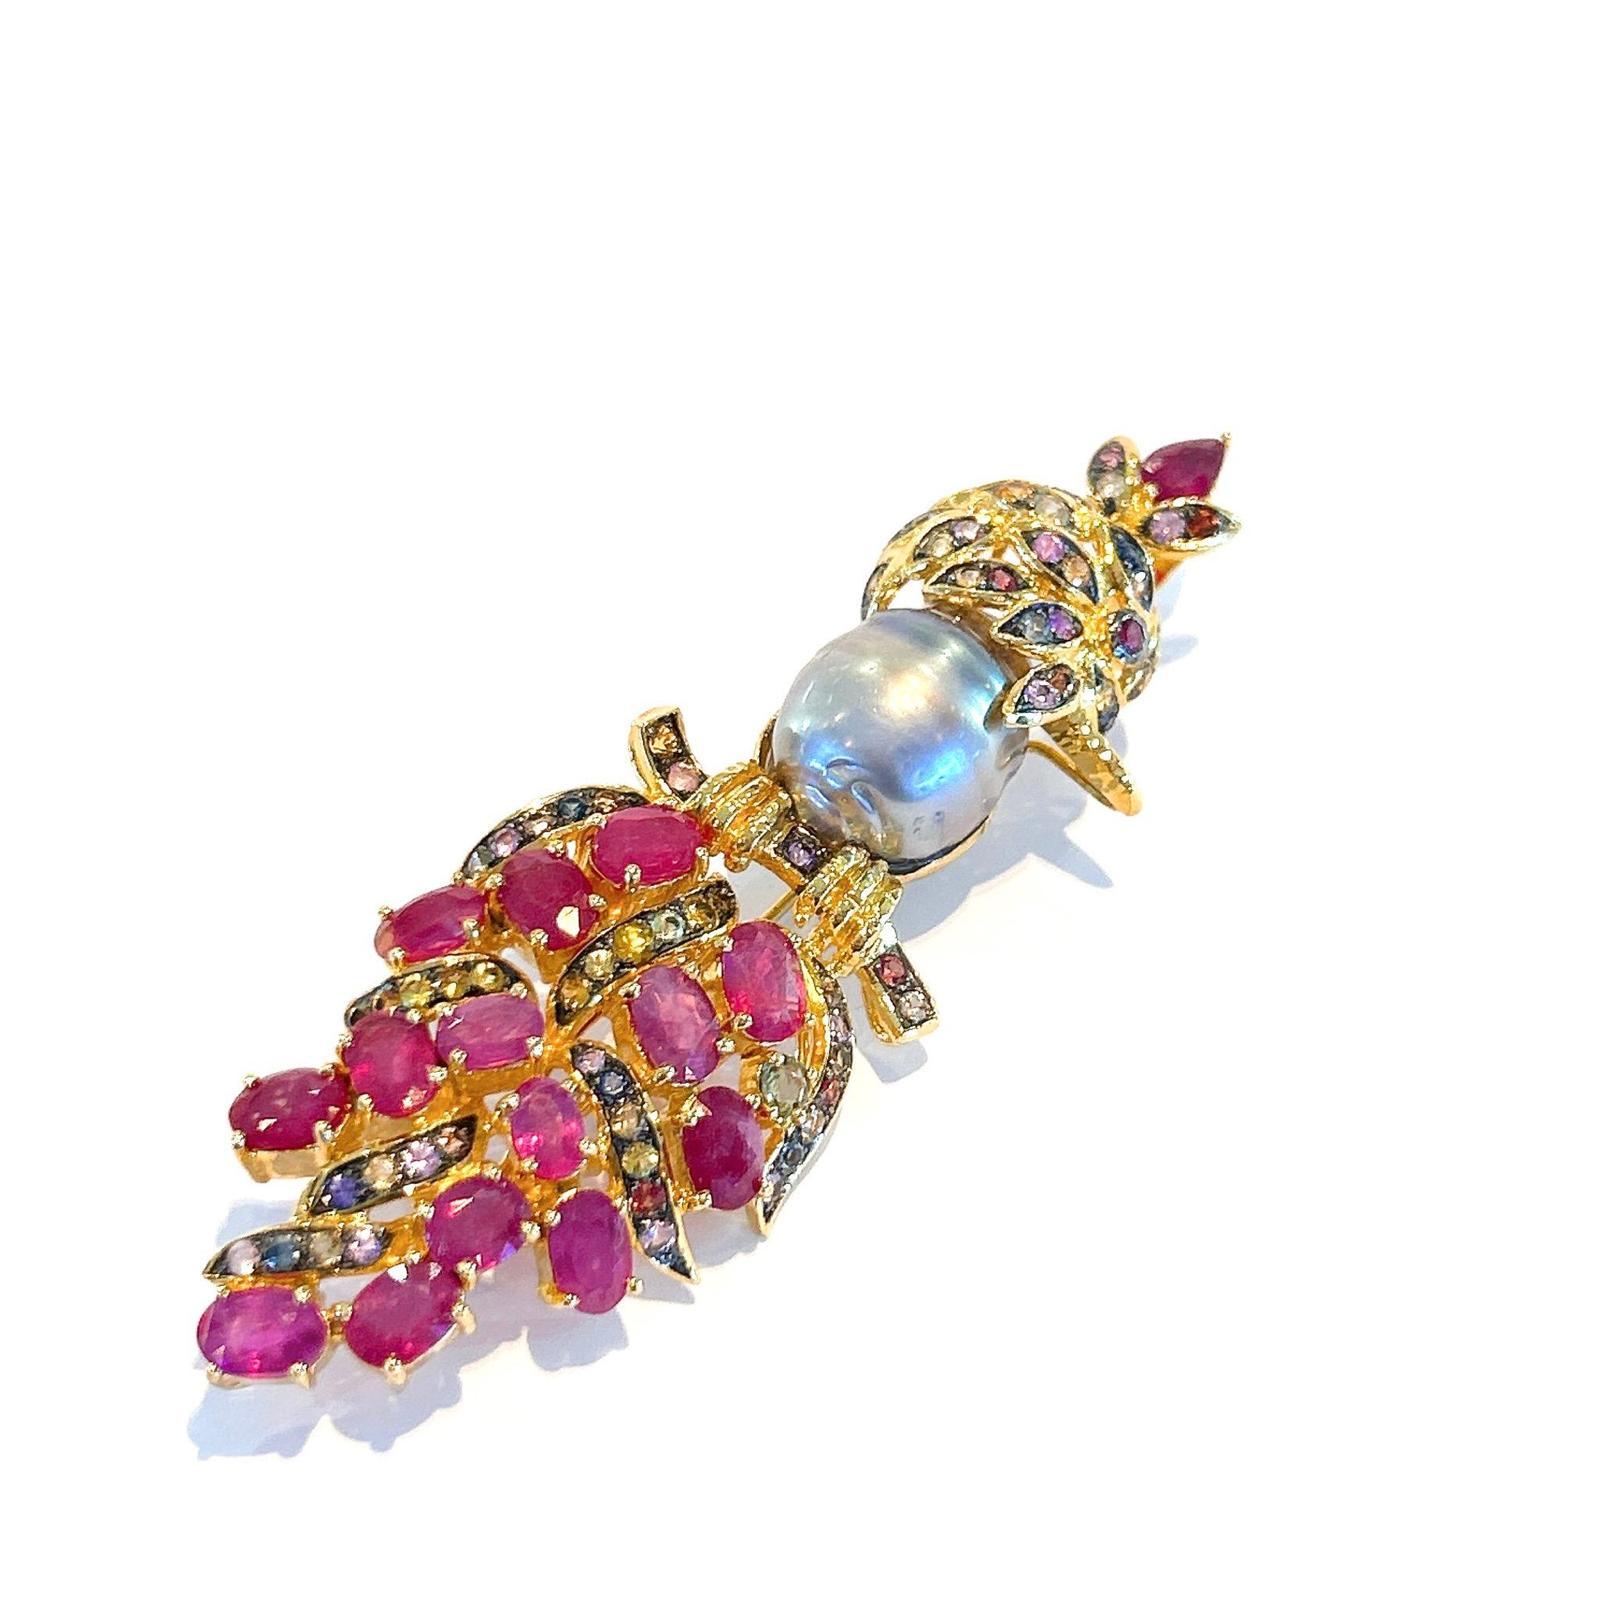 Bochic “Orient” Pearl, Ruby & Sapphire Iconic Brooch Set in 18k Gold & Silver For Sale 2